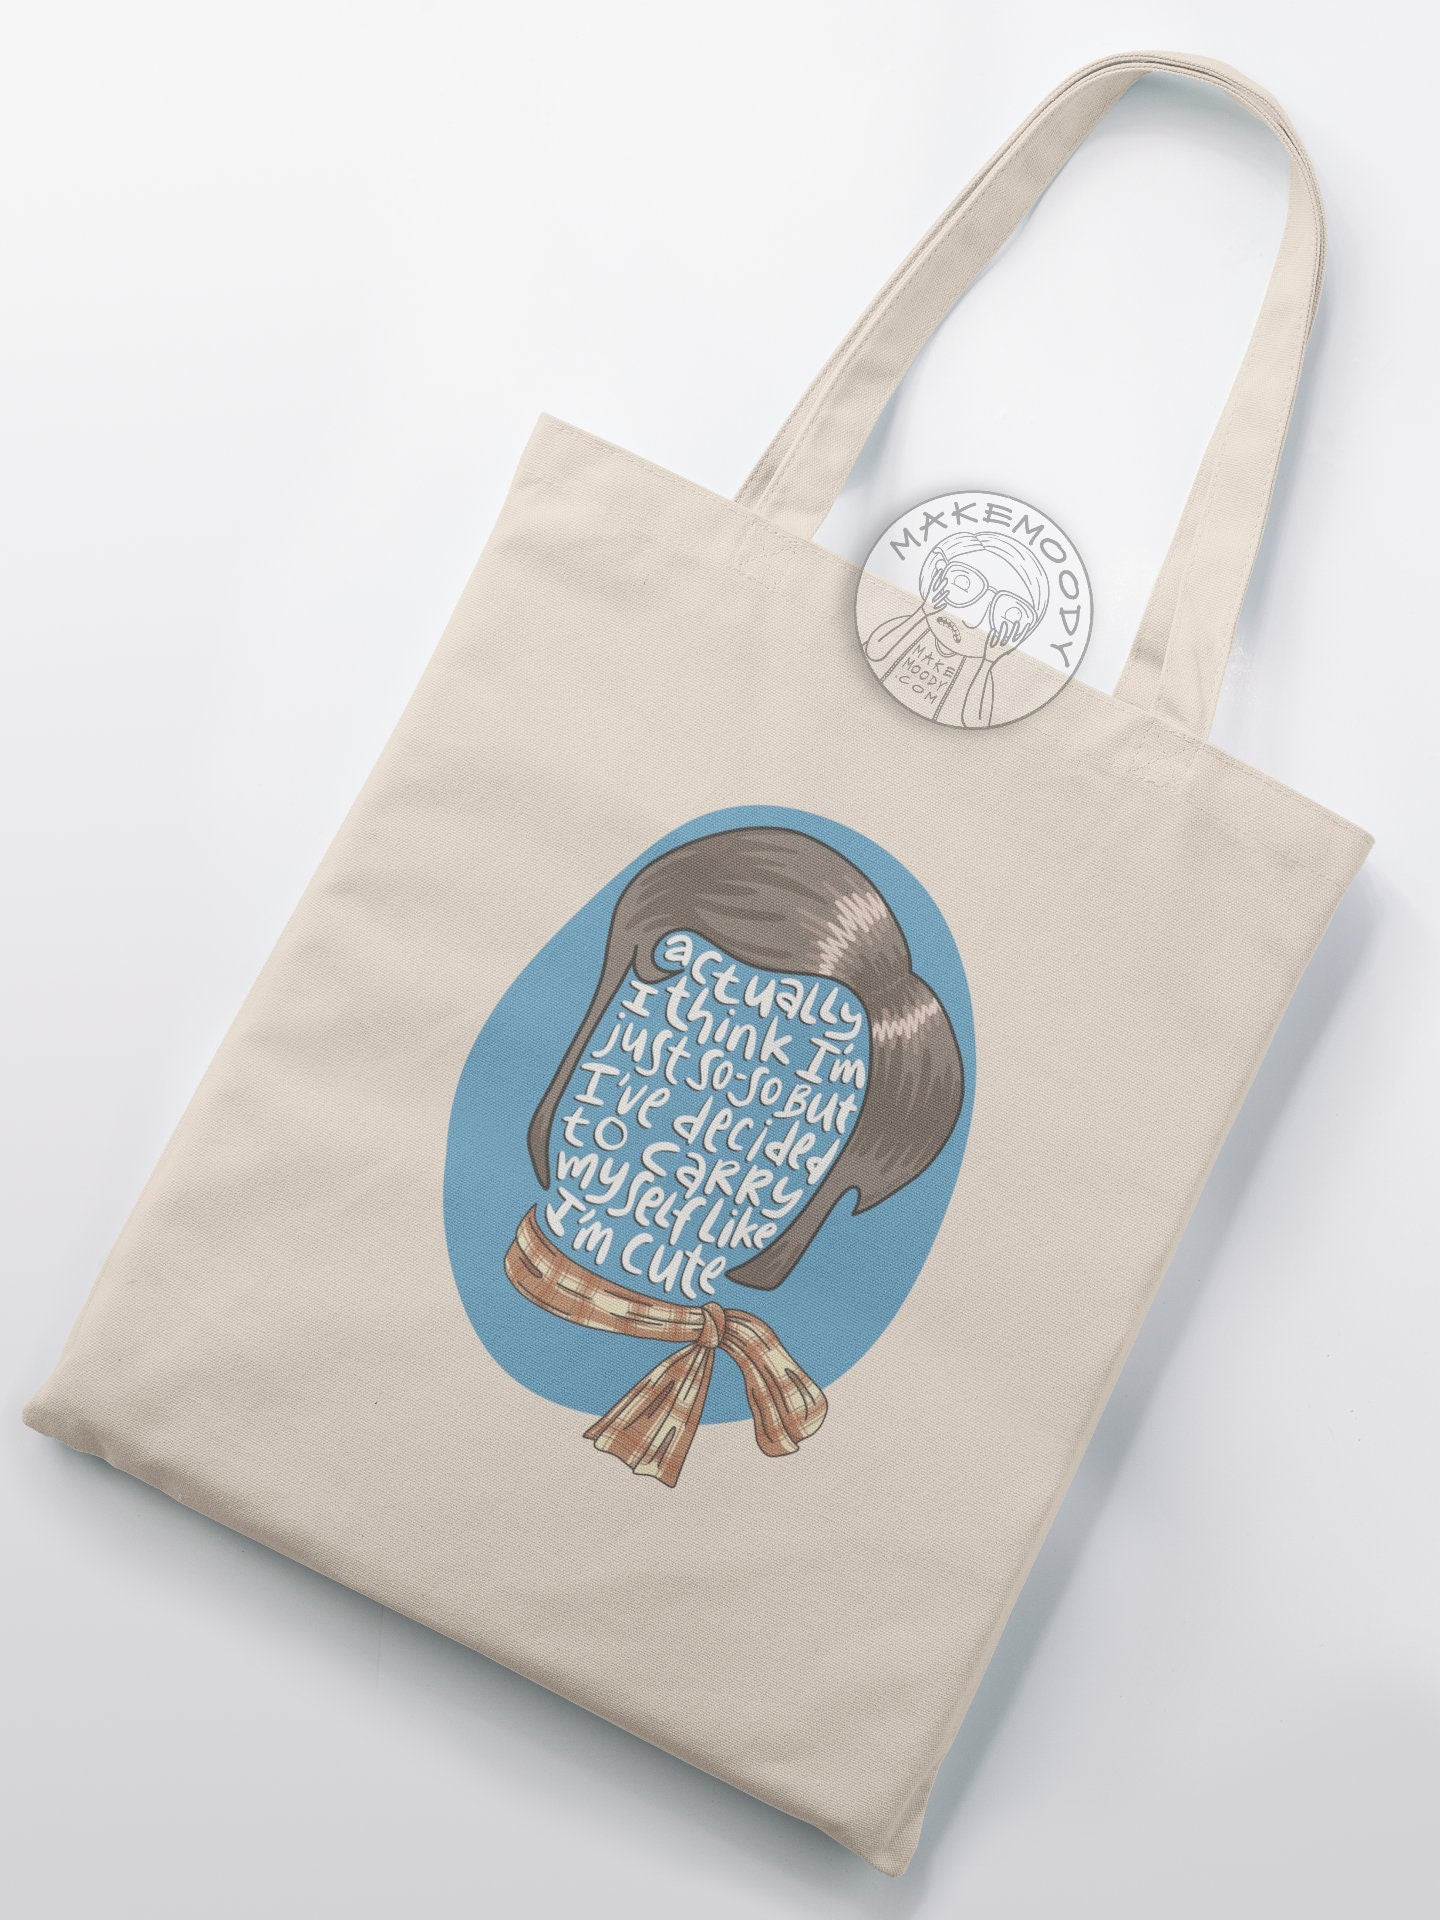 Our Flag Means Death Lucius TOTE BAG - Tote Bag - Taika Waititi Tote, Our Flag Means Death Tote, OFMD Tote, Stede Bonnet, Blackbeard Tote